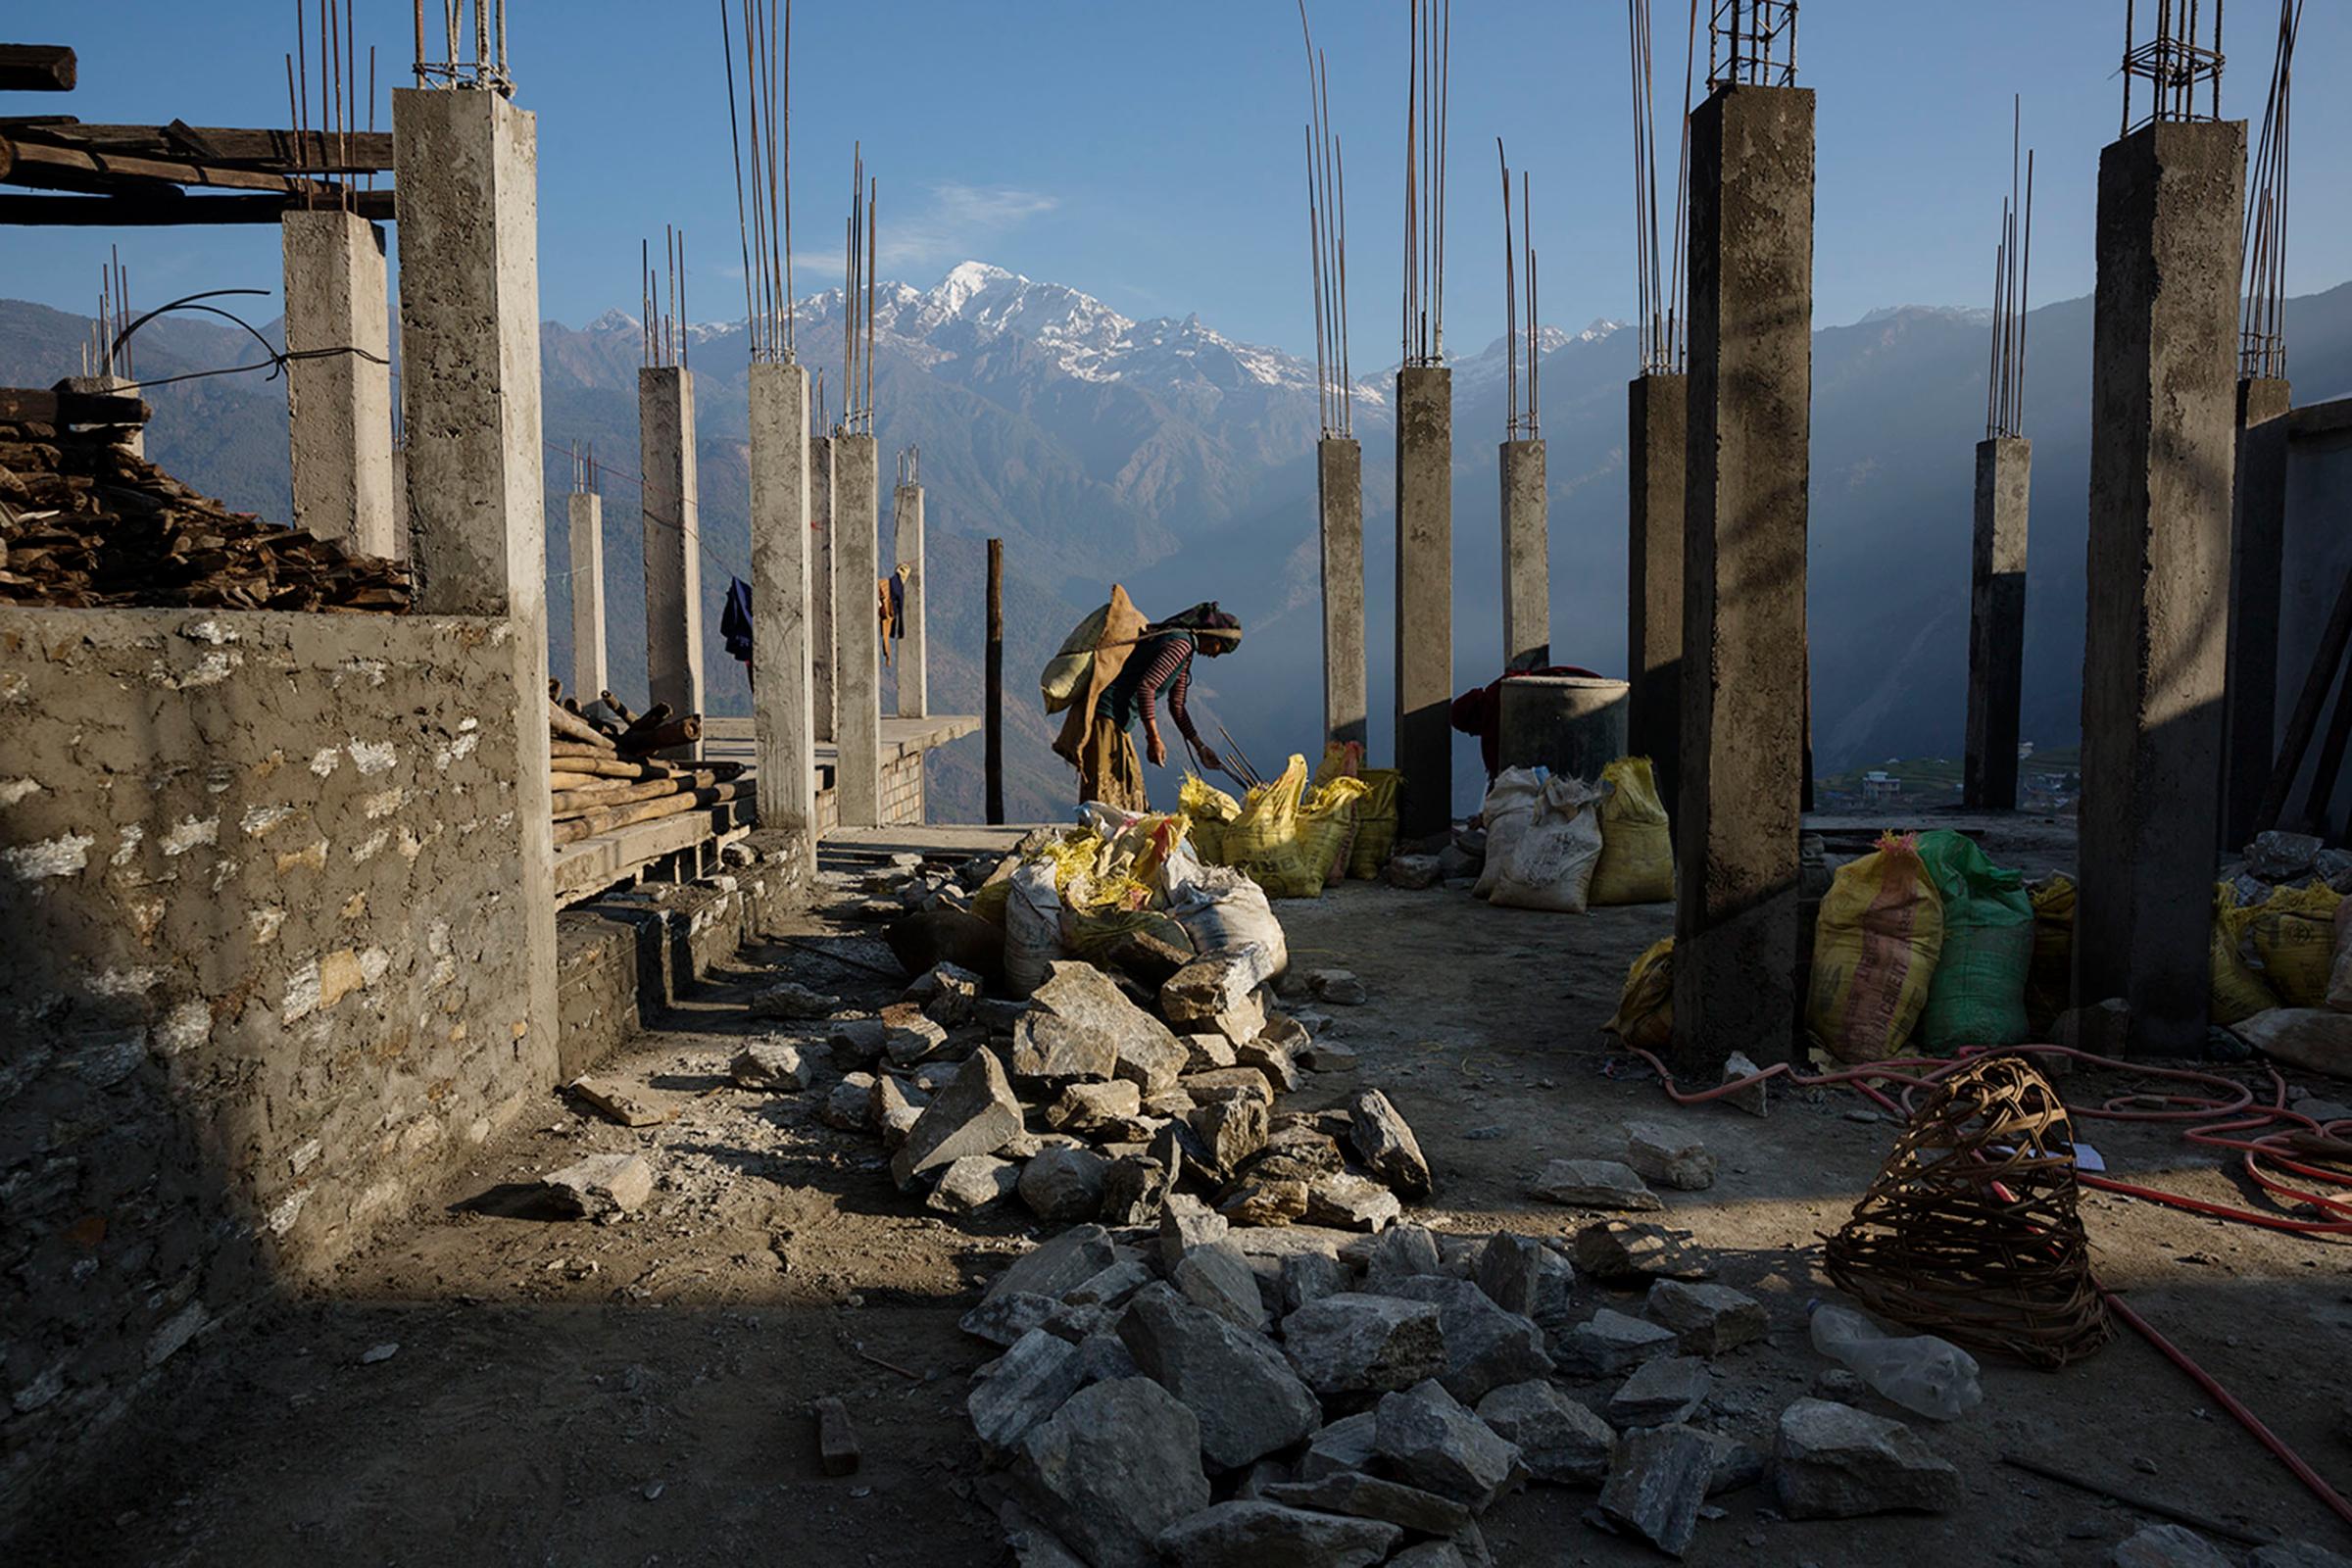 Villagers rebuild houses and pathways in the village of Barpak, in Gorkha district, Nepal, at the epicenter of the April and May 2015 earthquakes which killed 9000 people, April 6, 2016.